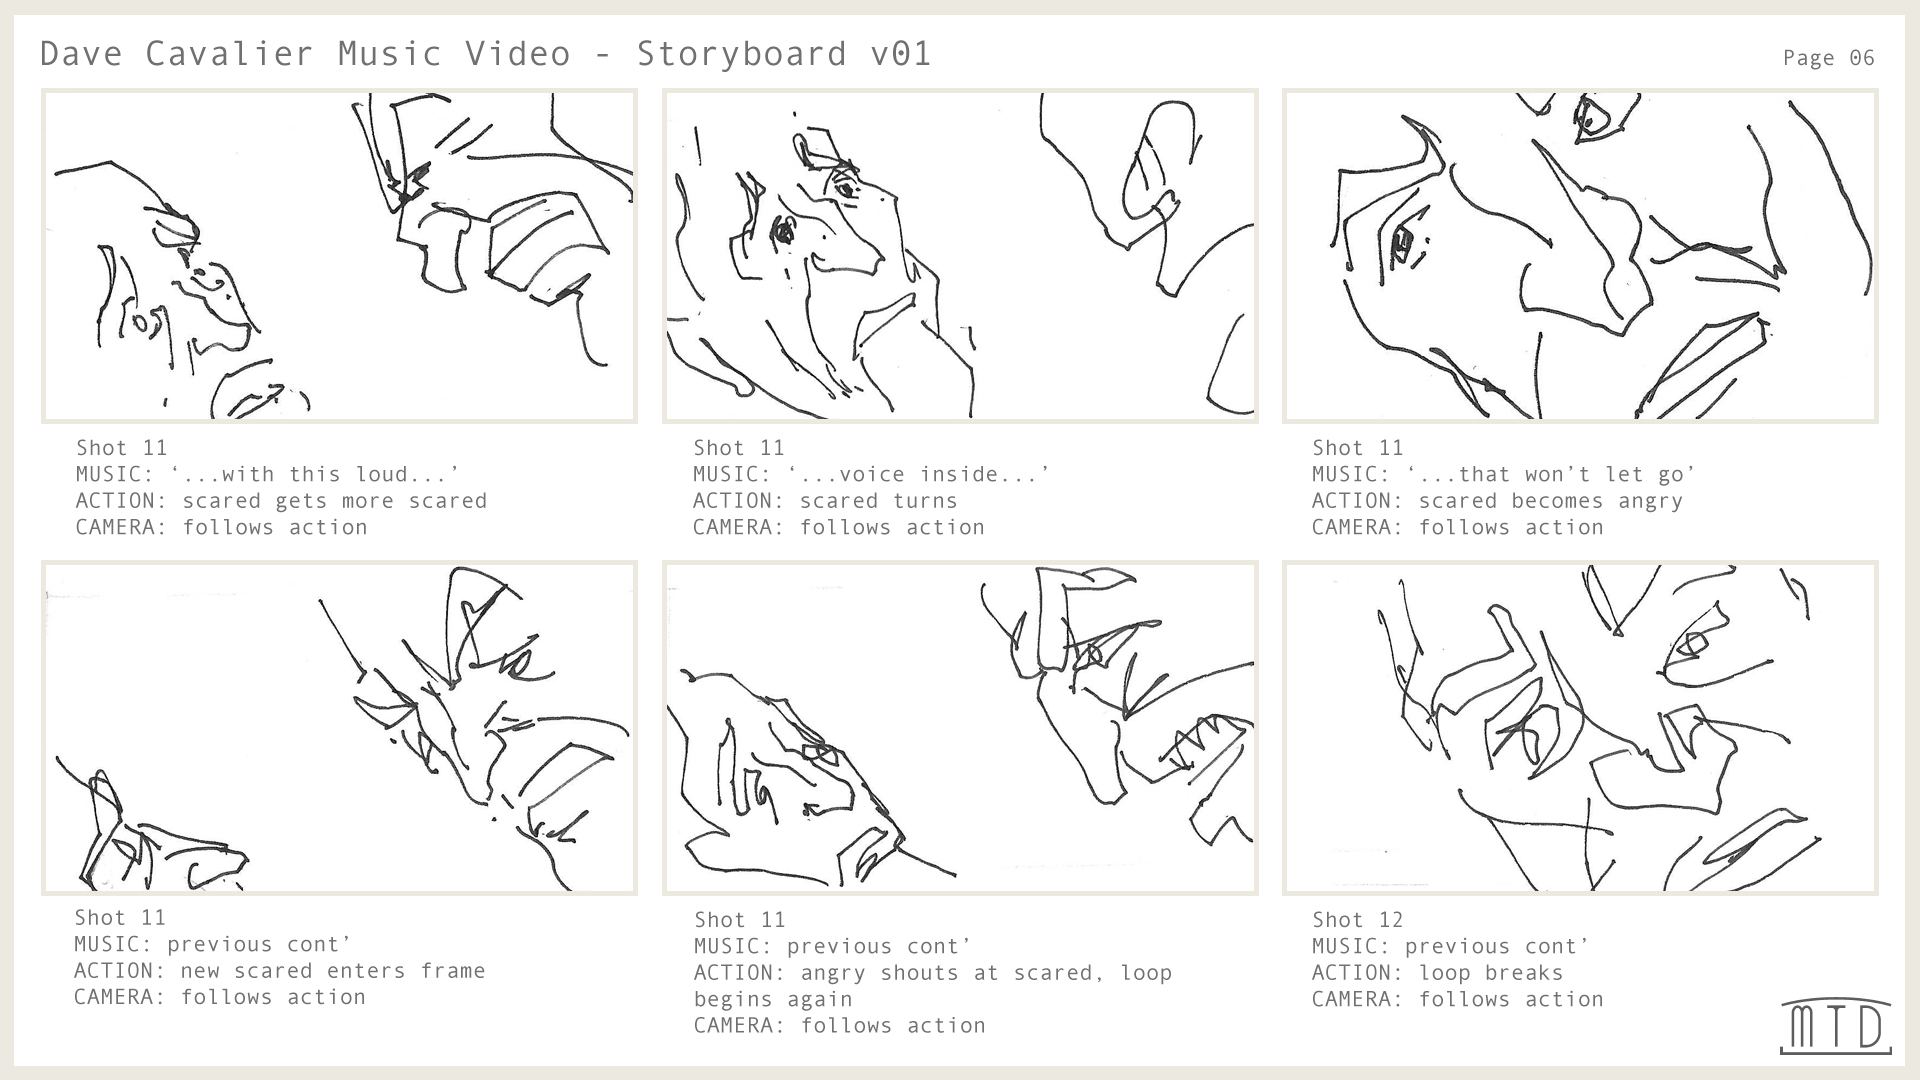 The Hold storyboard page 7